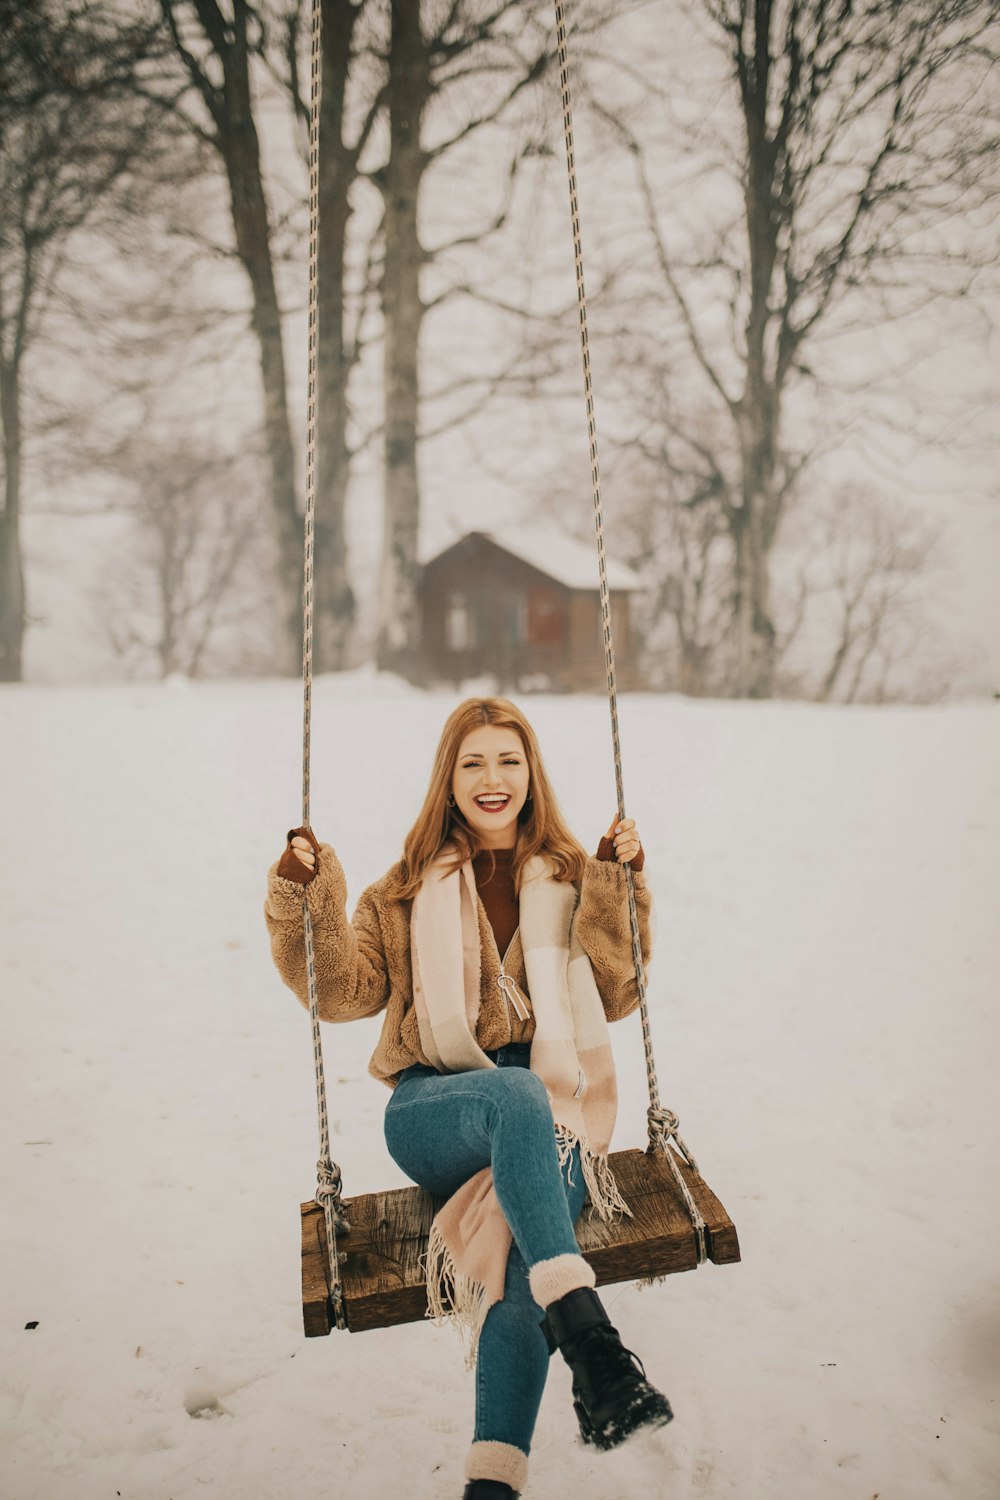 woman riding on swing outdoors